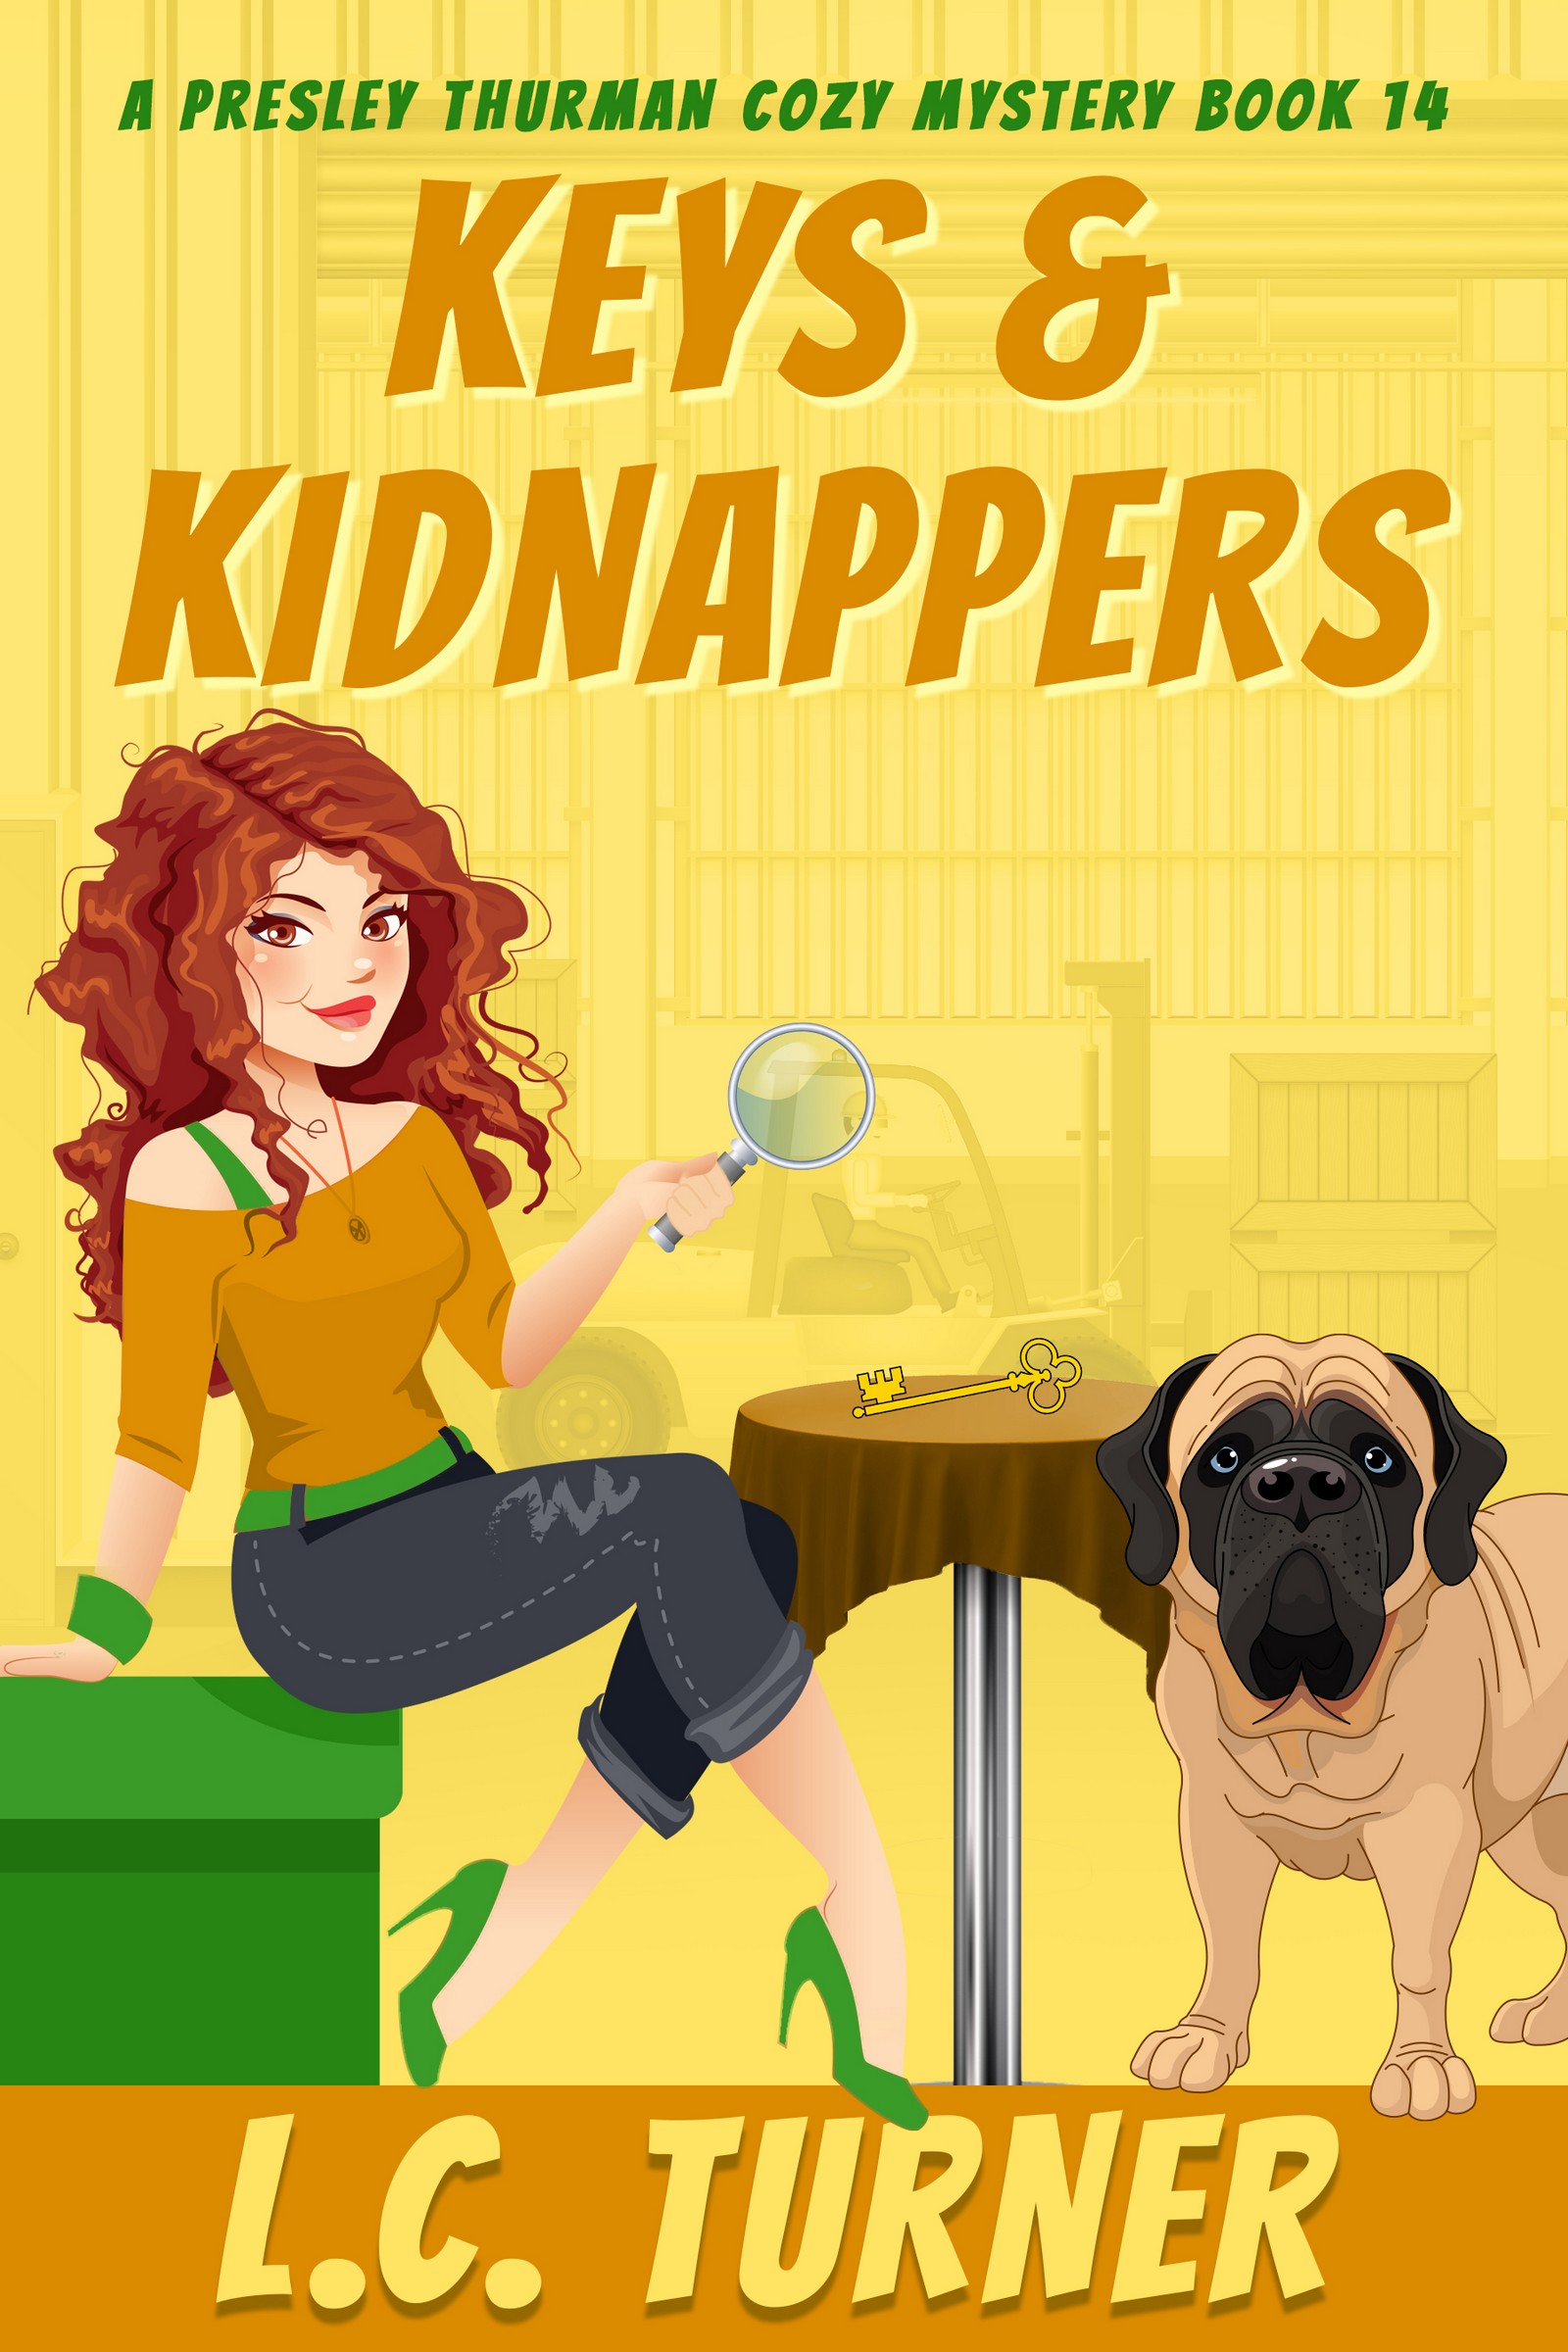 Keys & Kidnappers A Presley Thurman Cozy Mystery Book 14